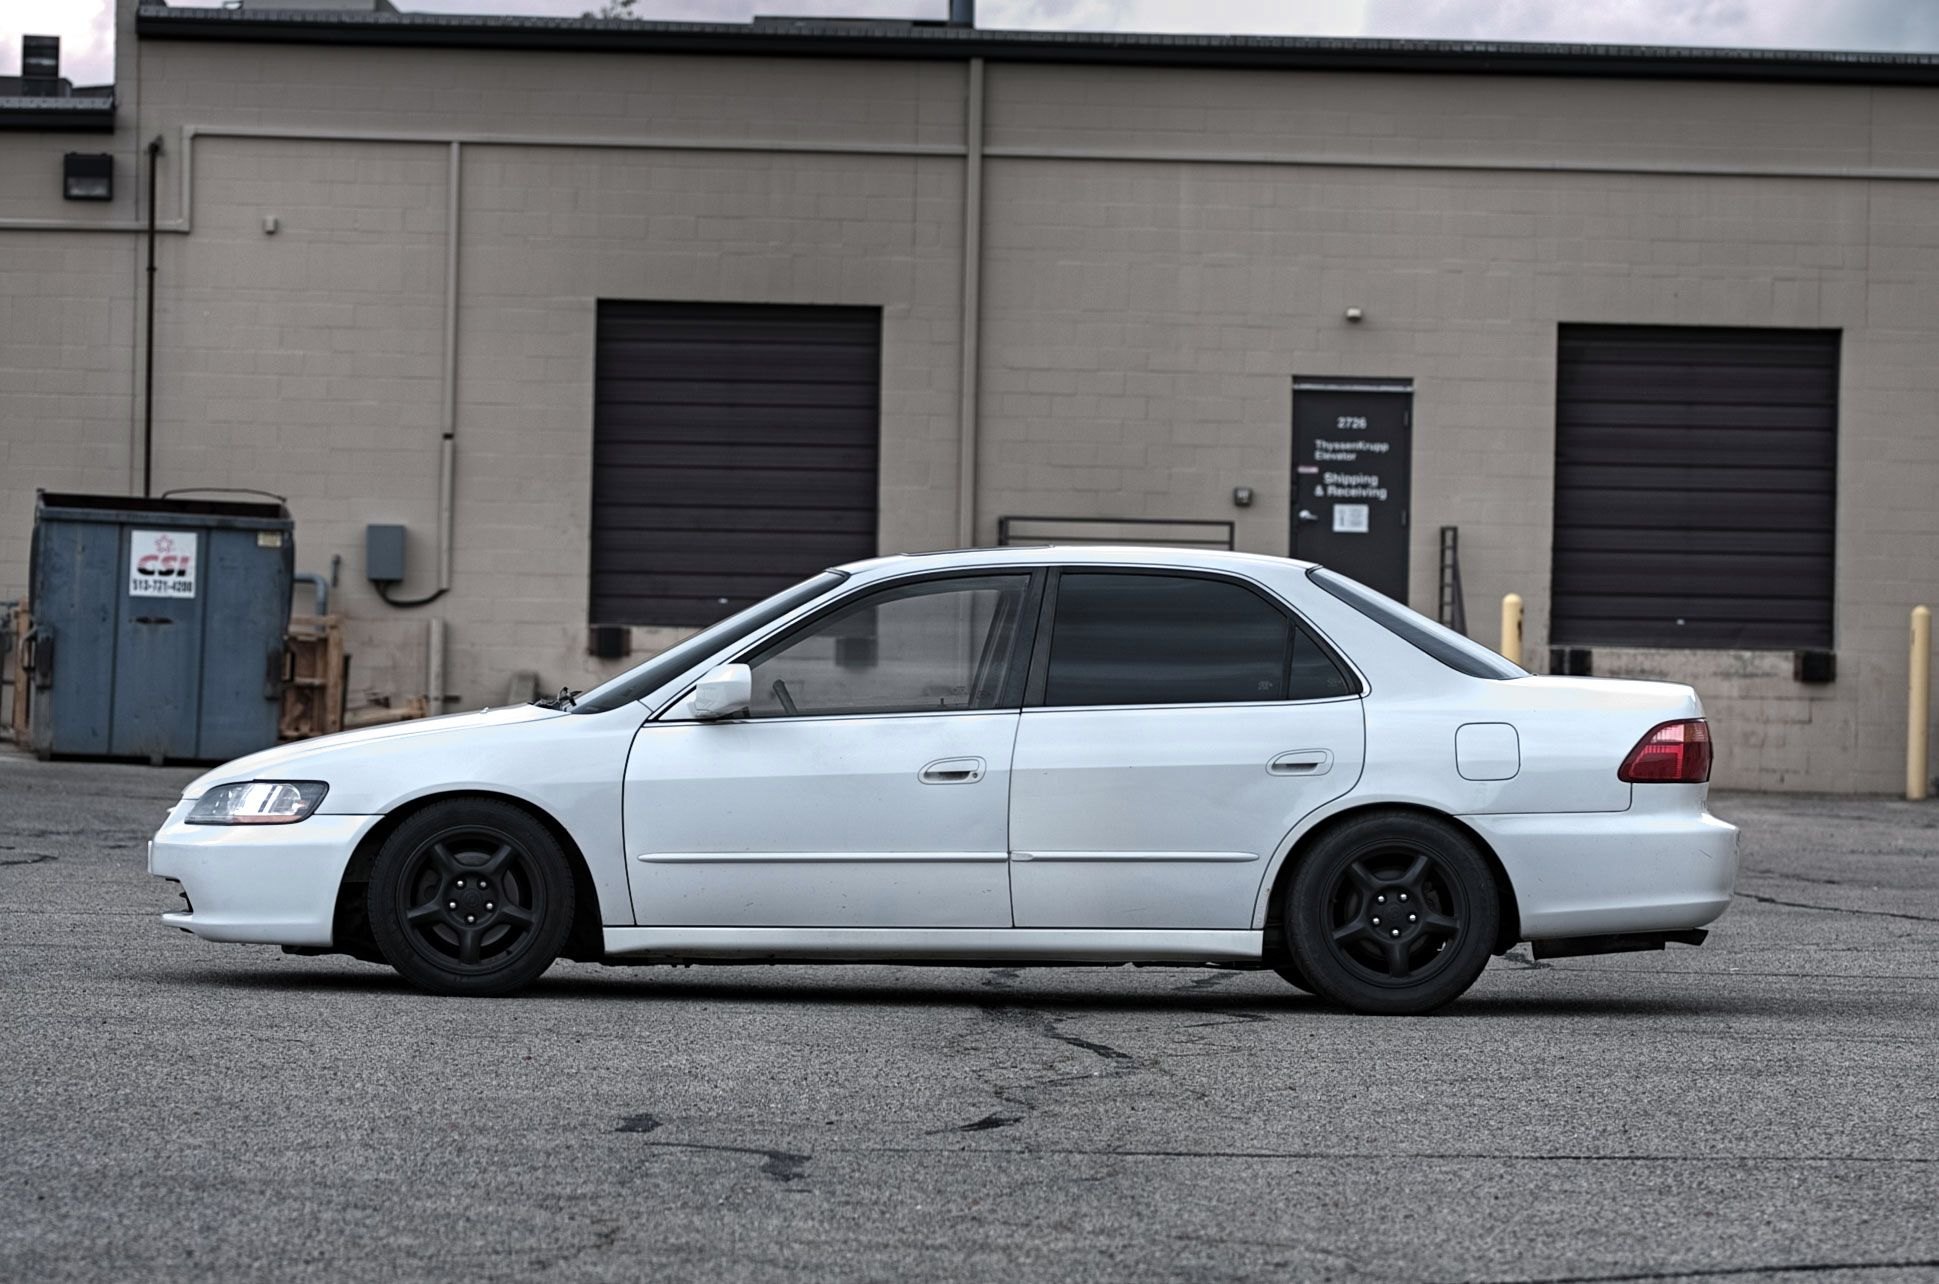 White Honda Accord with Aftermarket Side Skirts - Photo by dan kinzie